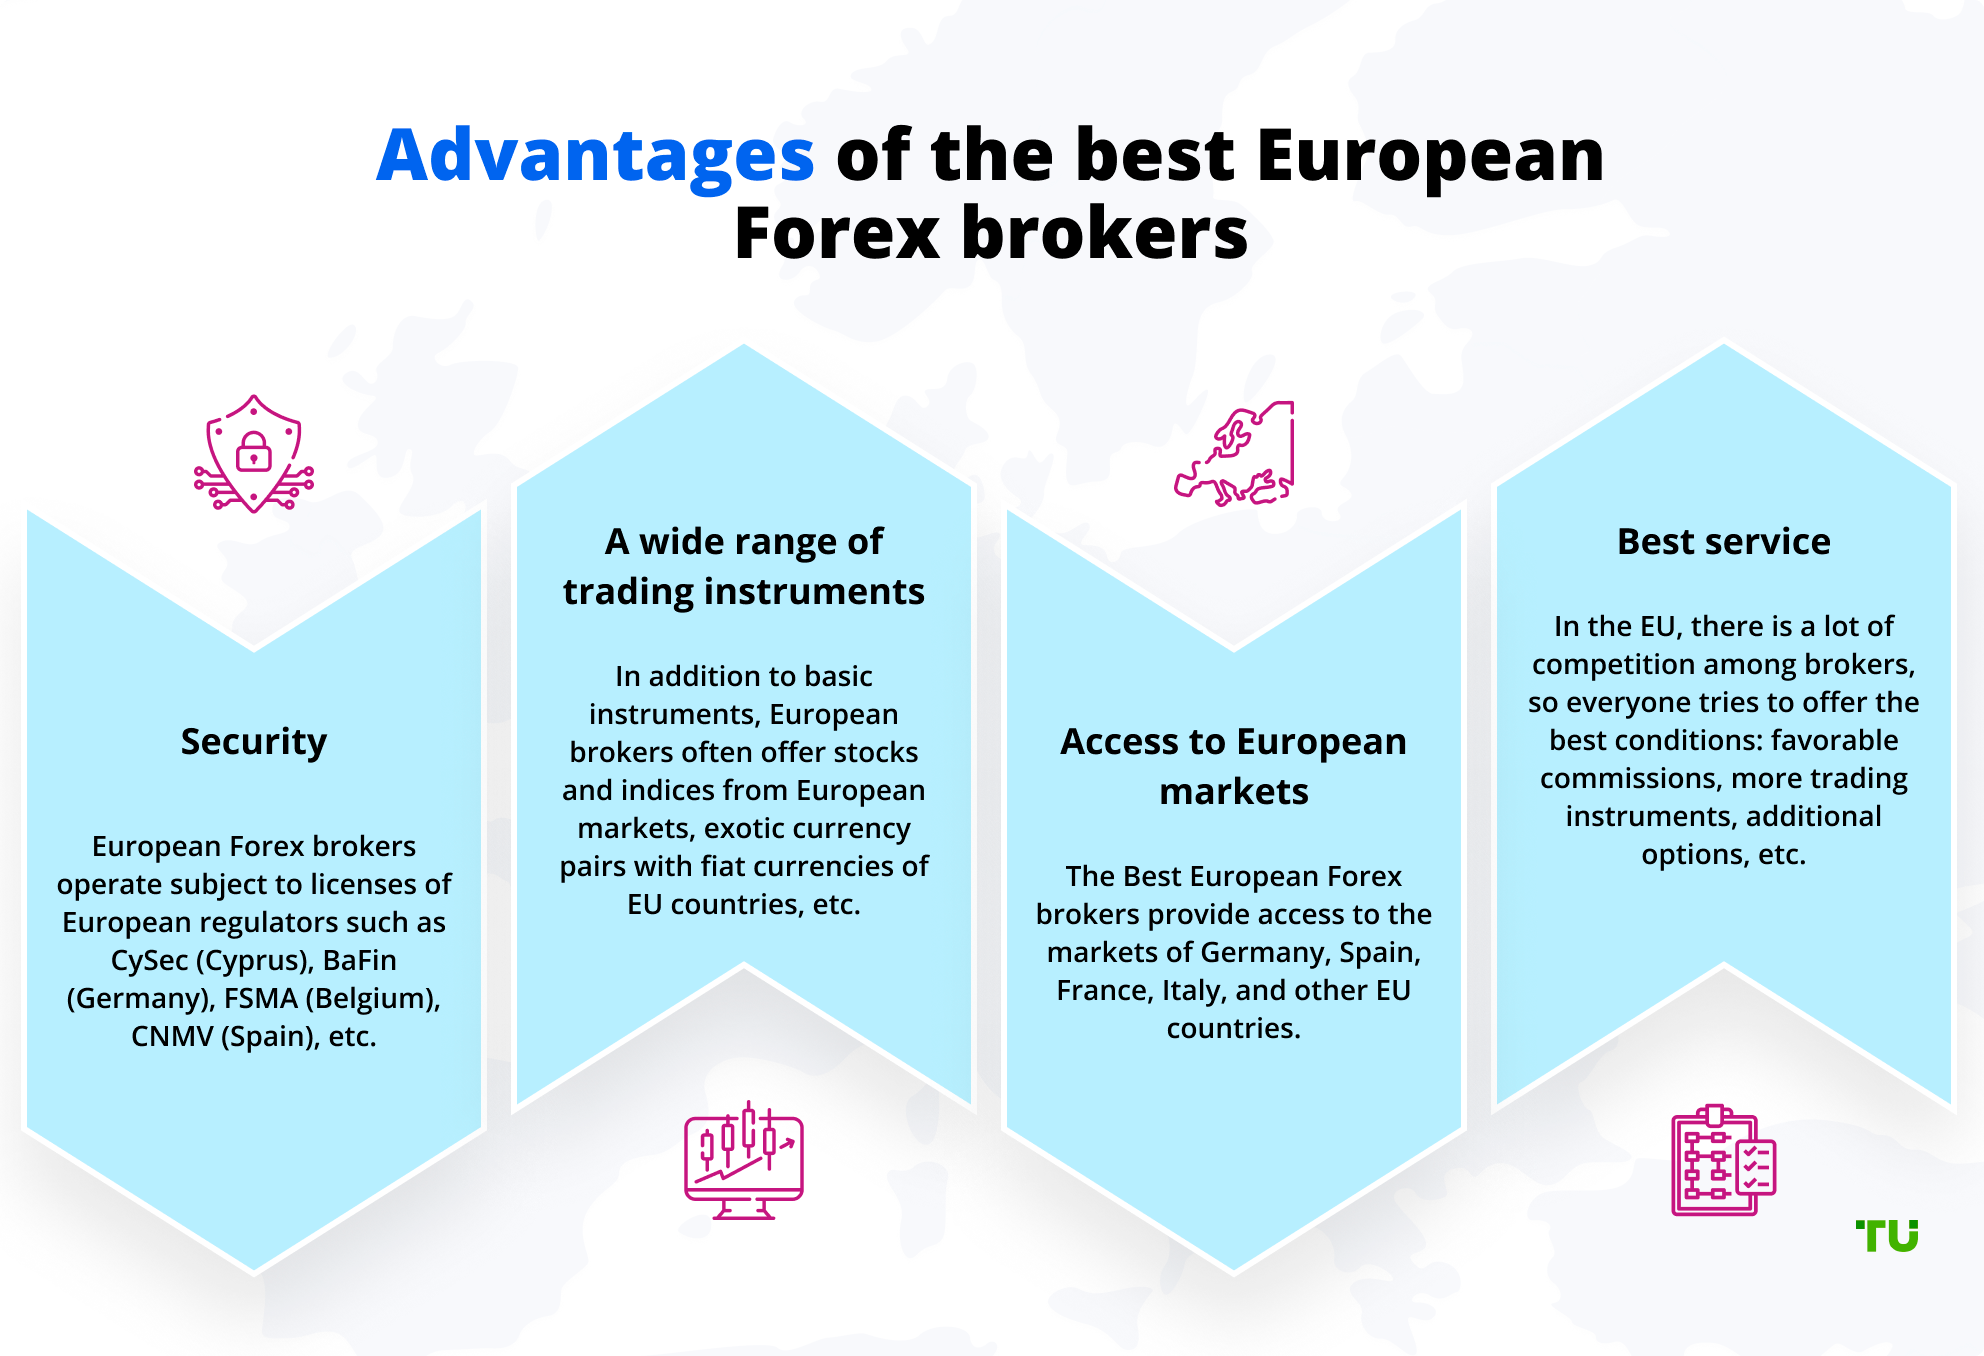 Advantages of the best European Forex brokers